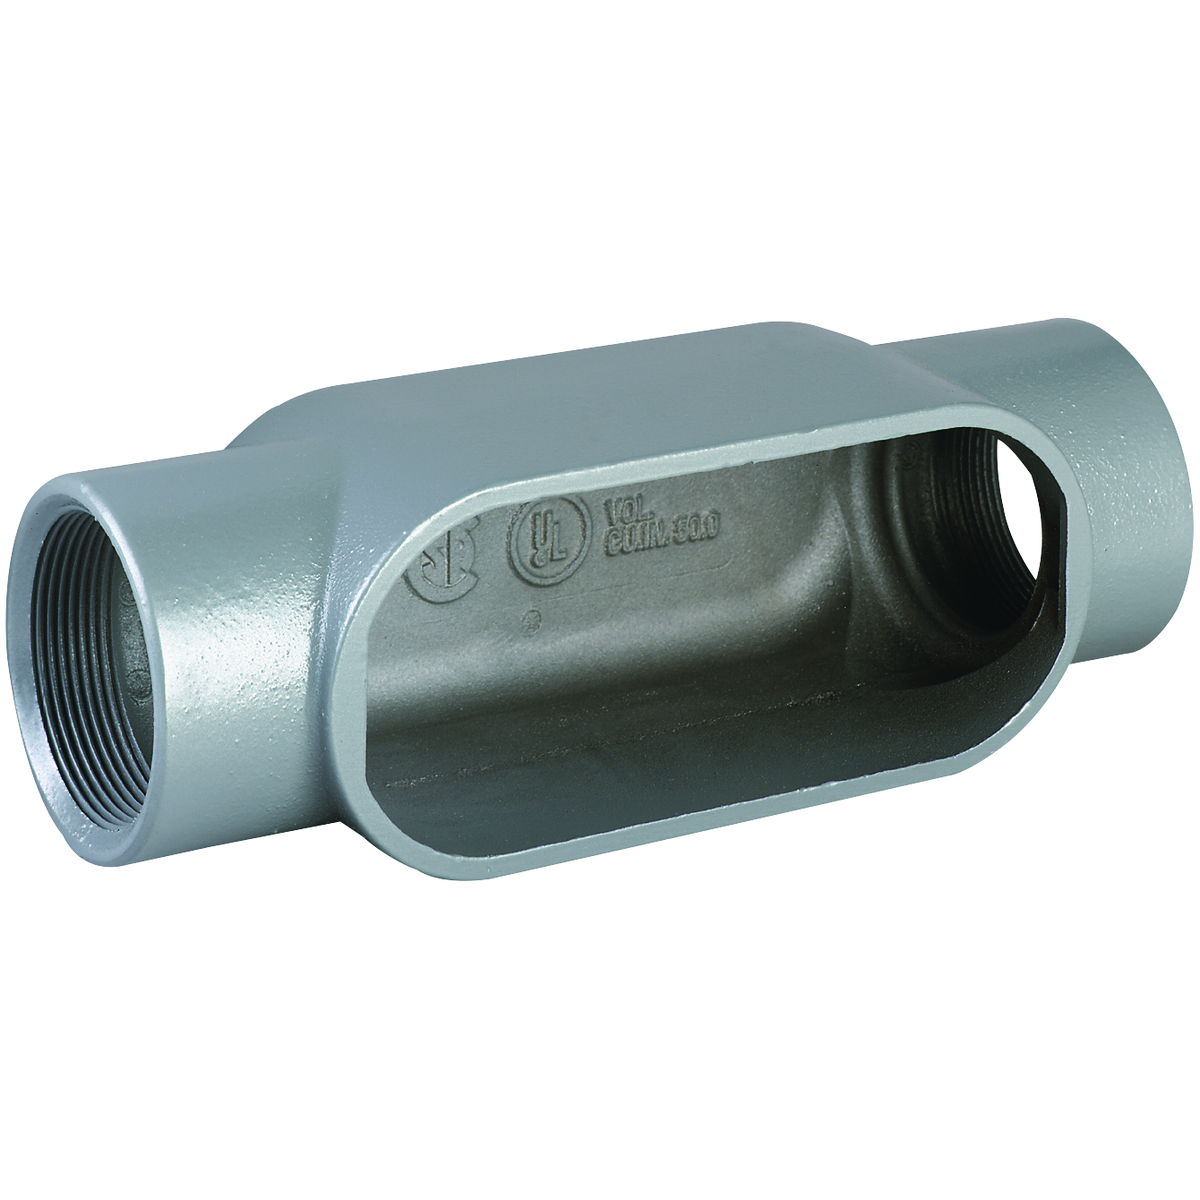 DURALOY 7 SERIES - IRON CONDUIT BODY - C TYPE - HUB SIZE 2 INCH - VOLUME48.0 CUBIC INCHES